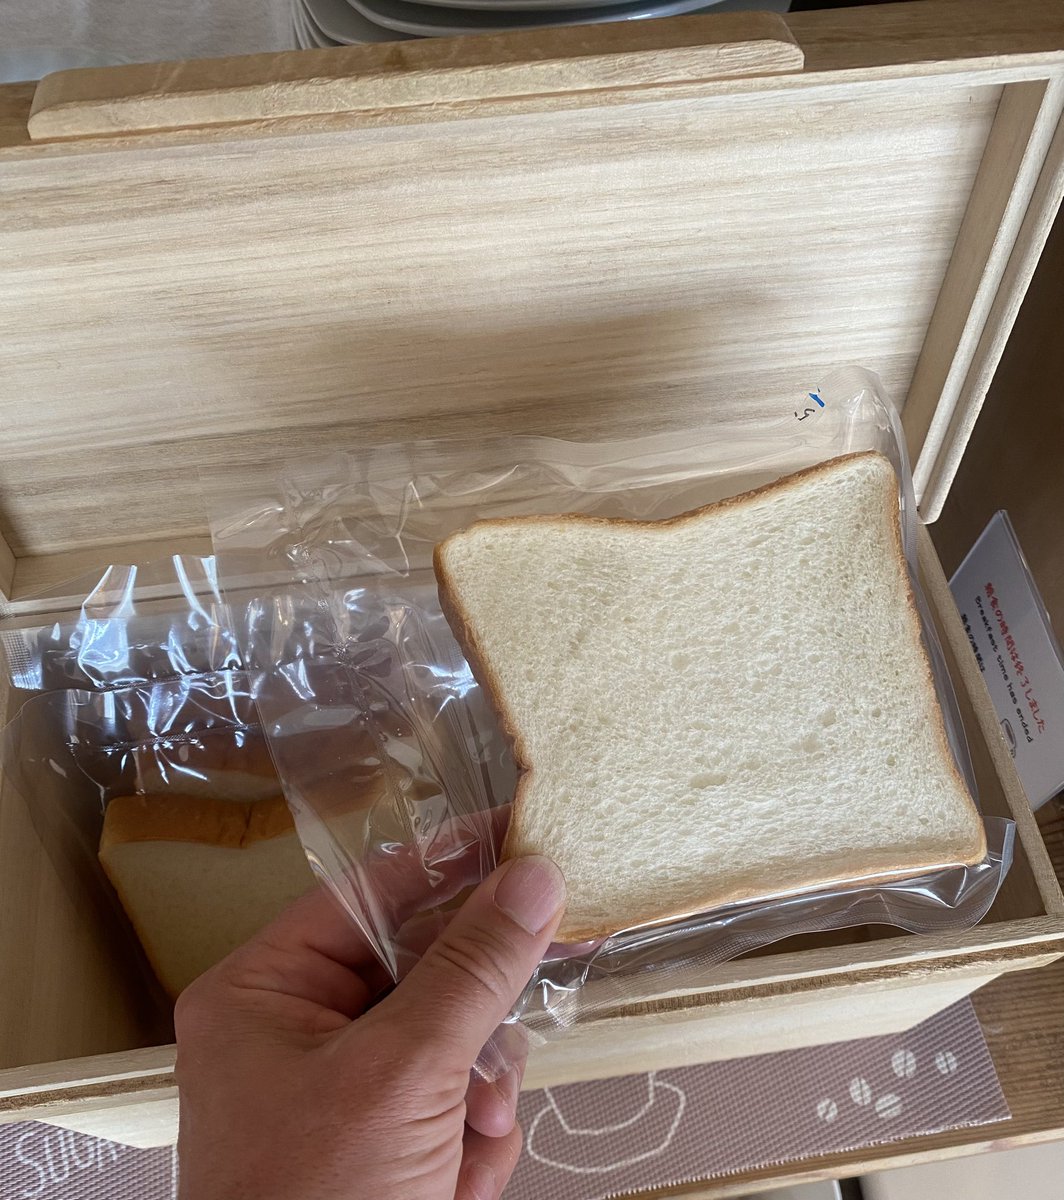 Place I’m staying in in Ishikawa wraps each individual slice of bread in plastic. When will this madness stop? #singleuseplastics